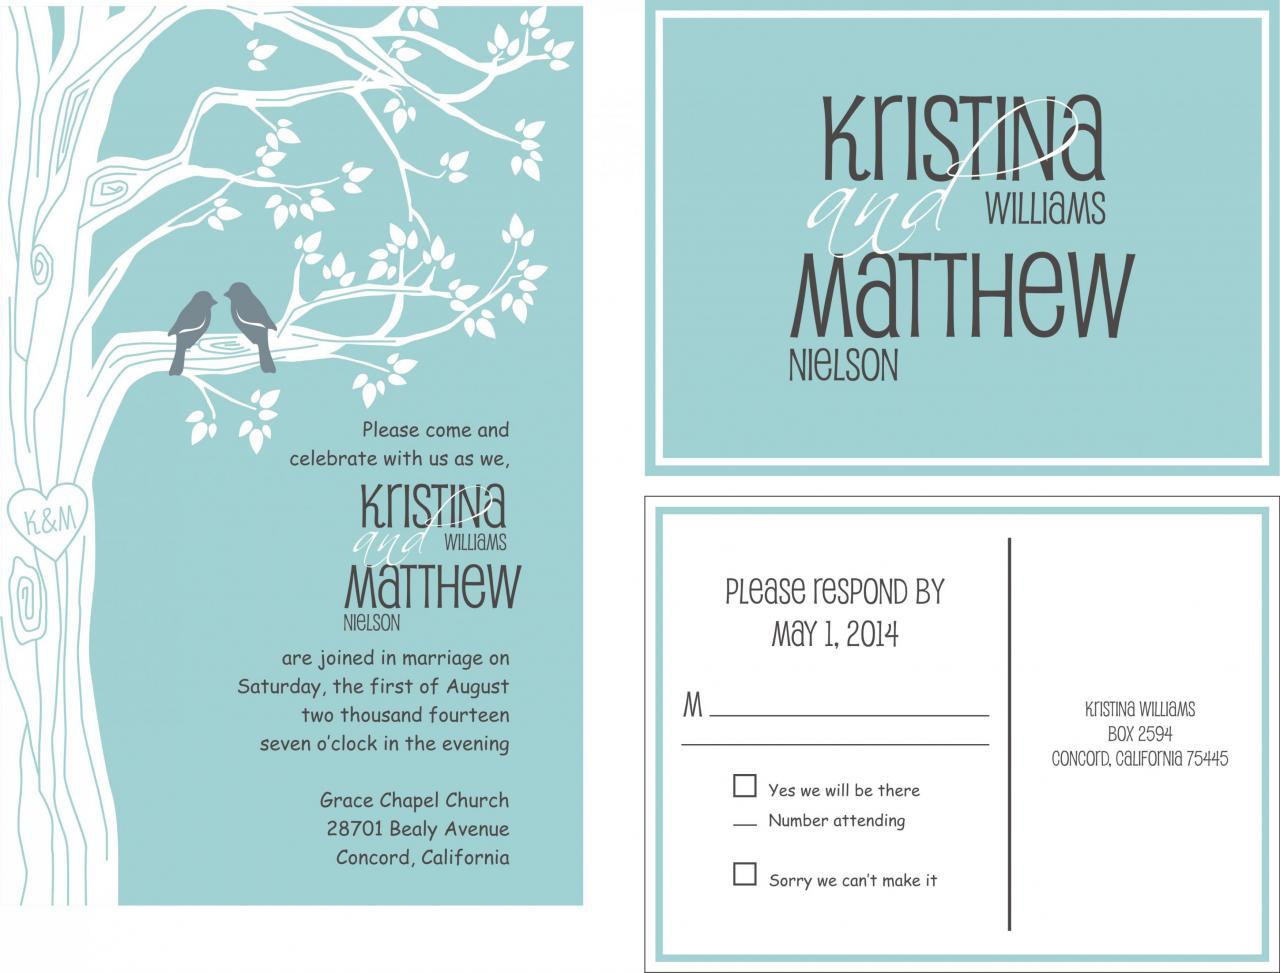 75 Sets Personalized Wedding Invitation With Love Birds//matching Rsvp Postcard//fully Customized To Your Wedding